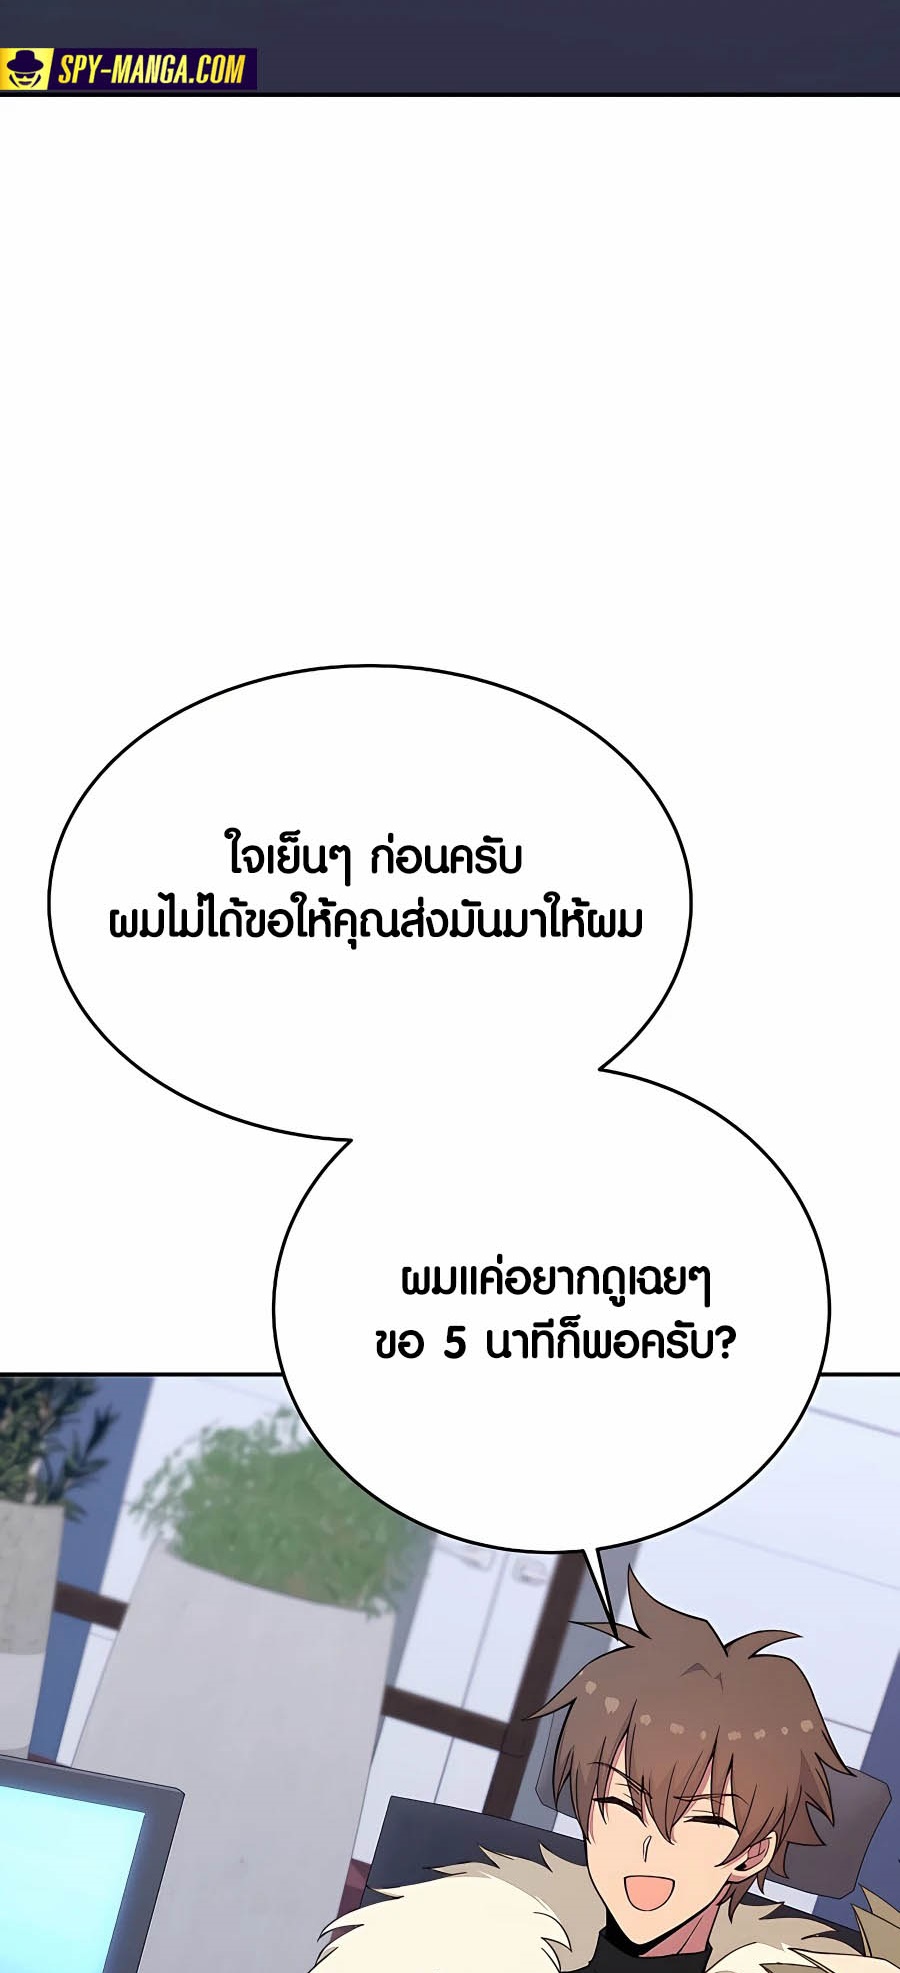 à¸­à¹ˆà¸²à¸™à¸¡à¸±à¸™à¸®à¸§à¸² à¹€à¸£à¸·à¹ˆà¸­à¸‡ The Part Time Land of the Gods 56 36